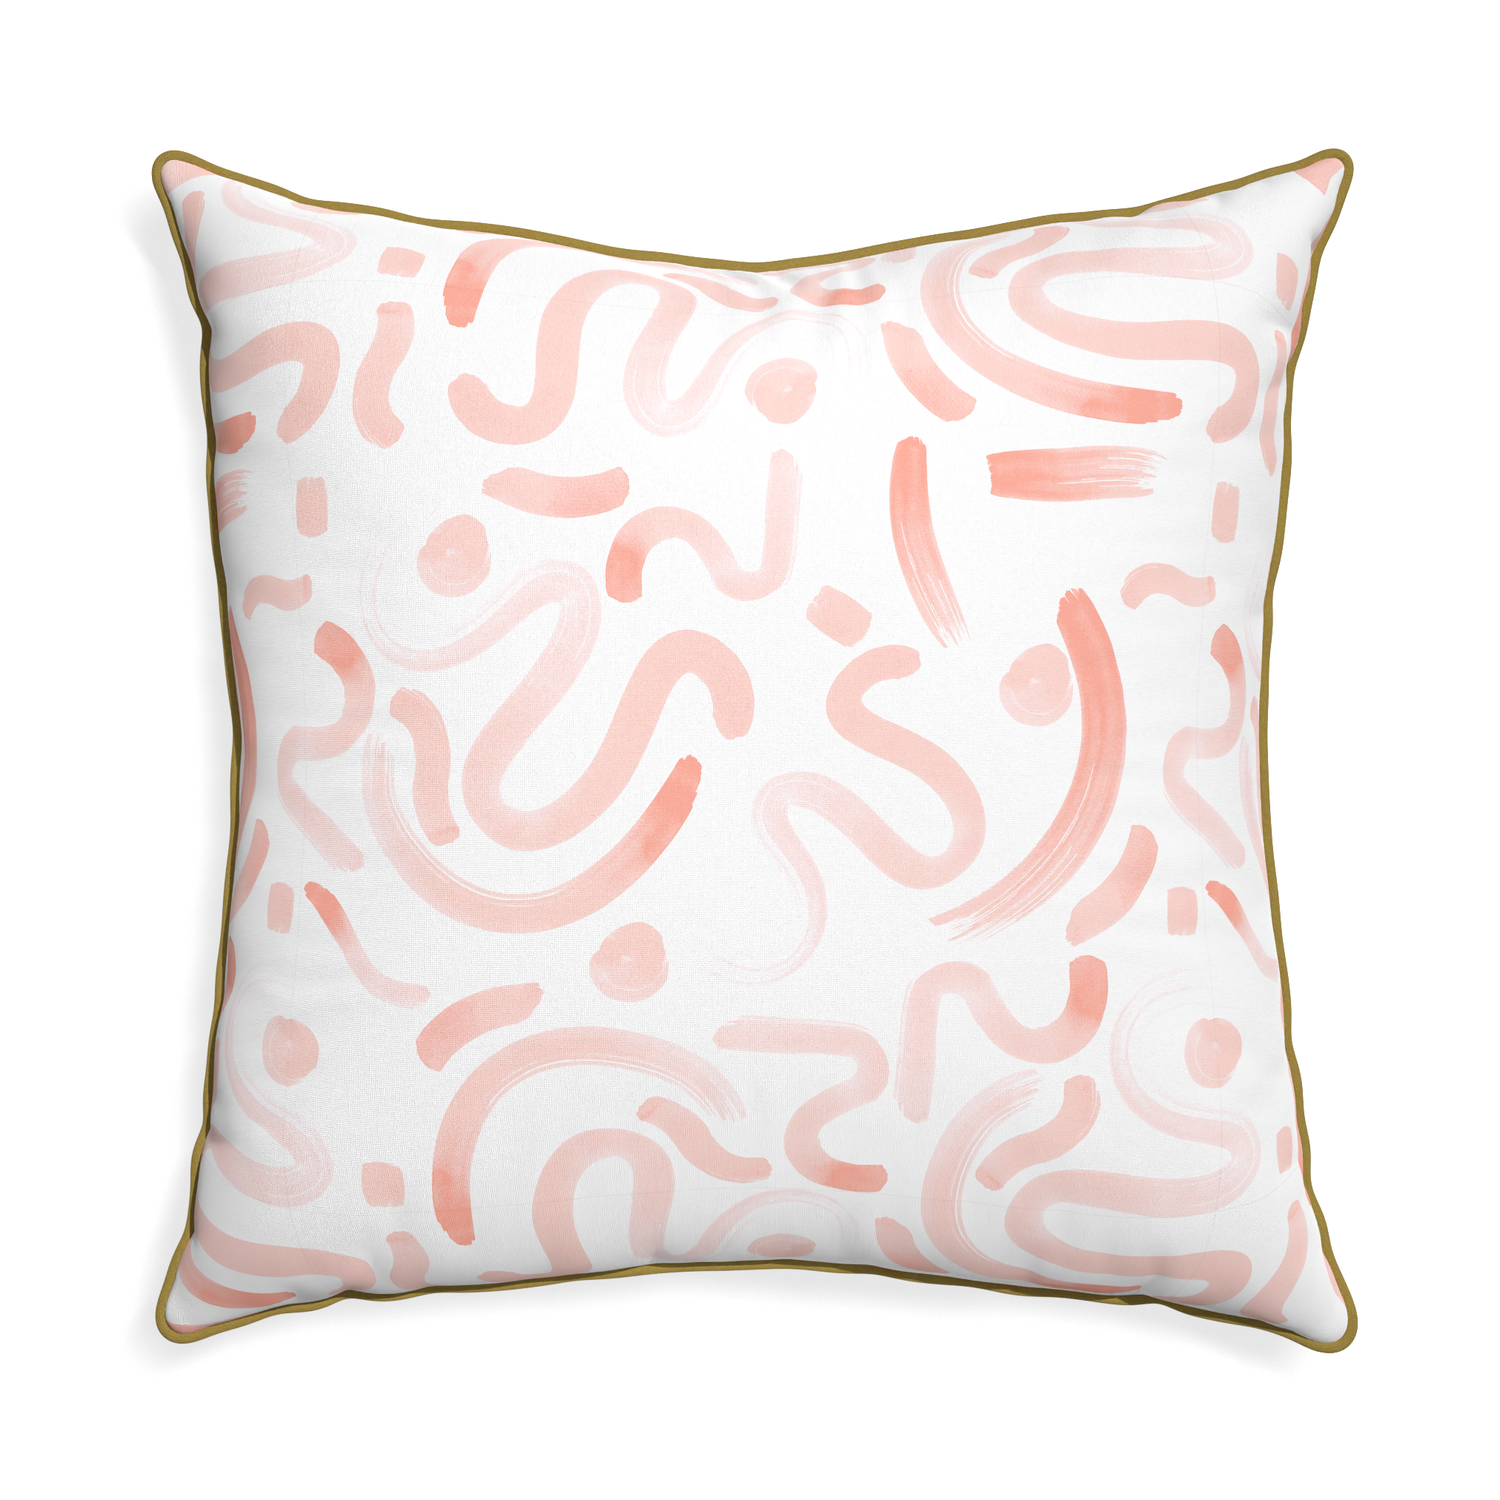 Euro-sham hockney pink custom pink graphicpillow with c piping on white background